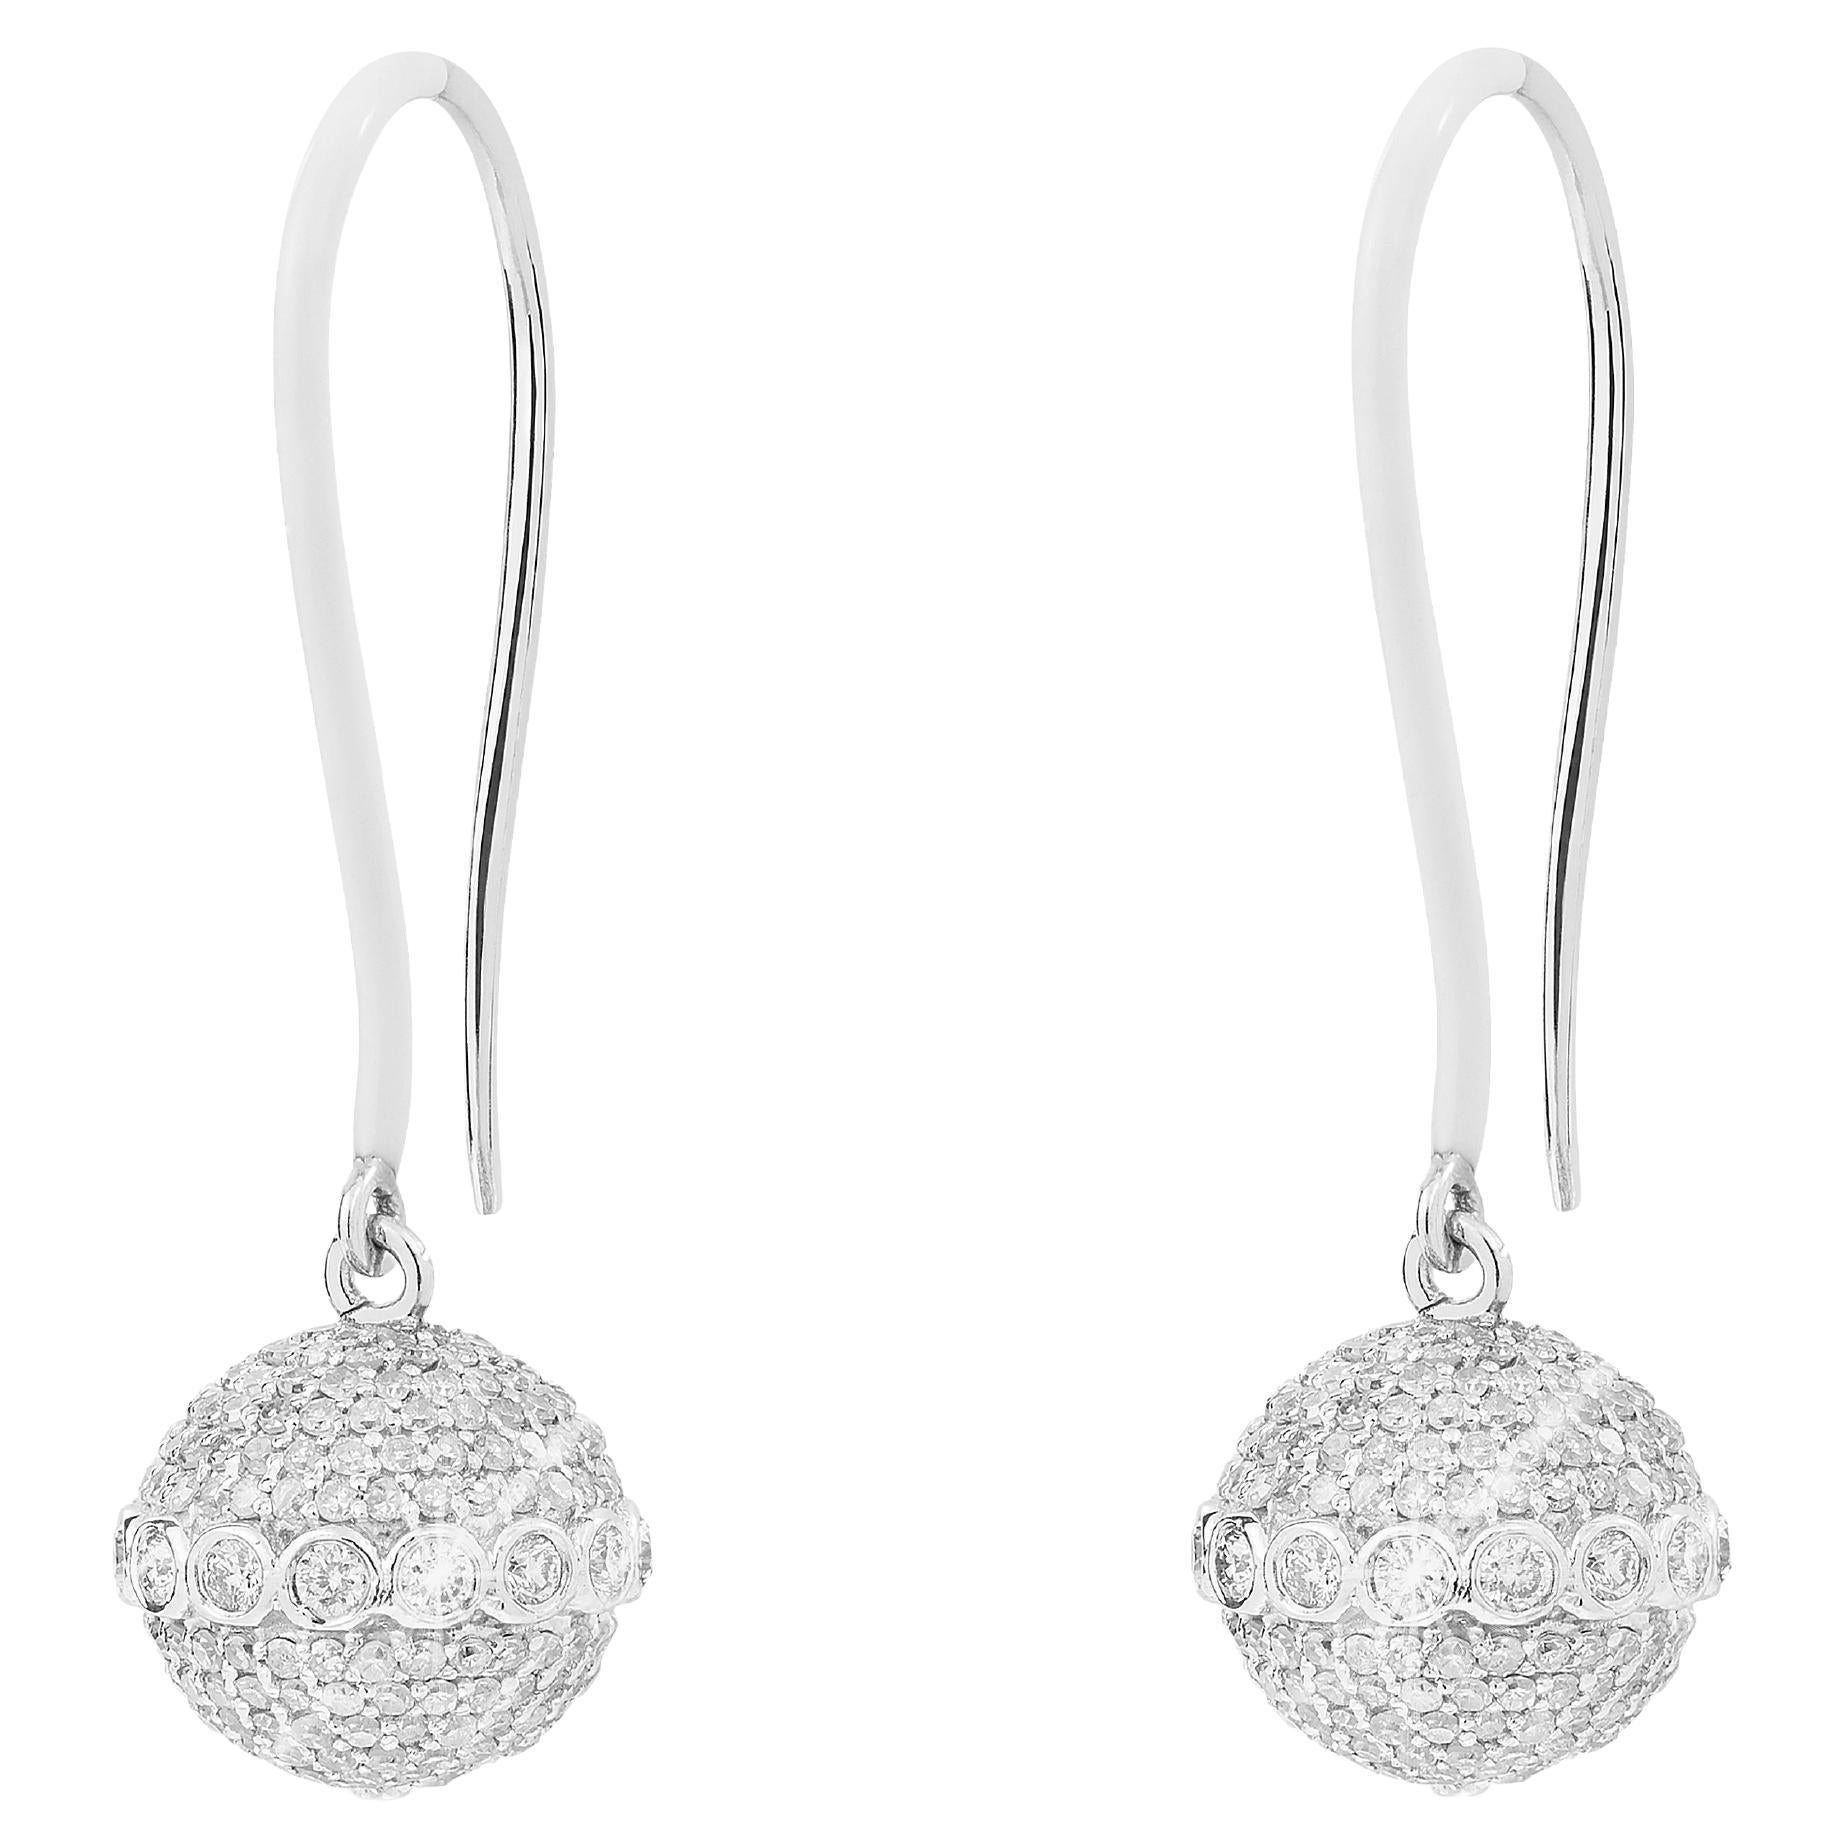 18k White Gold Earrings with Diamond-Encrusted Orbs and White Enamel